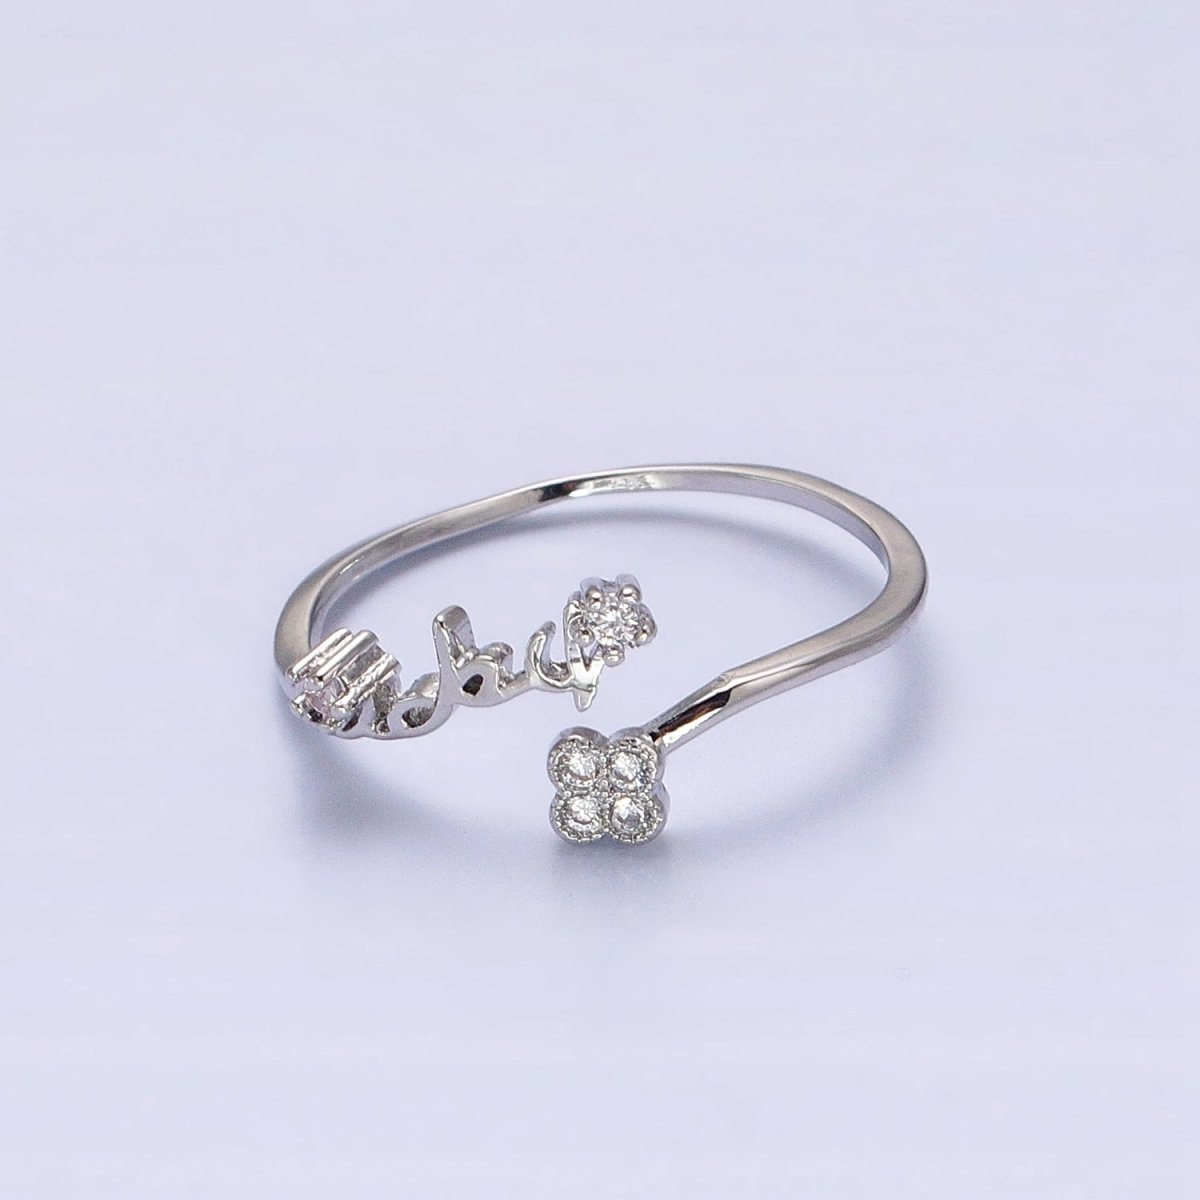 Thin Gold Plated Ring Wrap Flower CZ Stone Ring for Minimalist Jewelry O-1807 O-1808 - DLUXCA